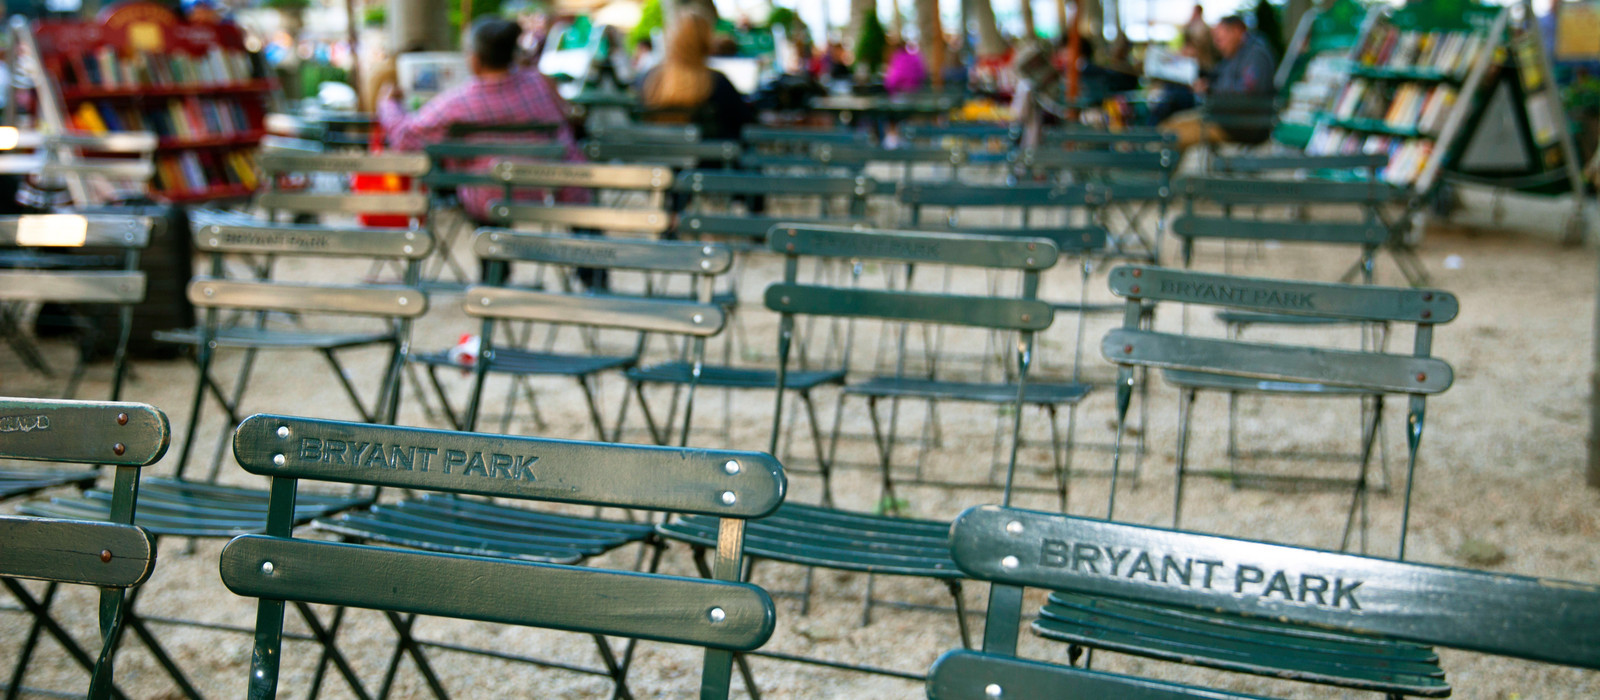 Bryant Park Concerts and Events | Westgate New York Grand Central